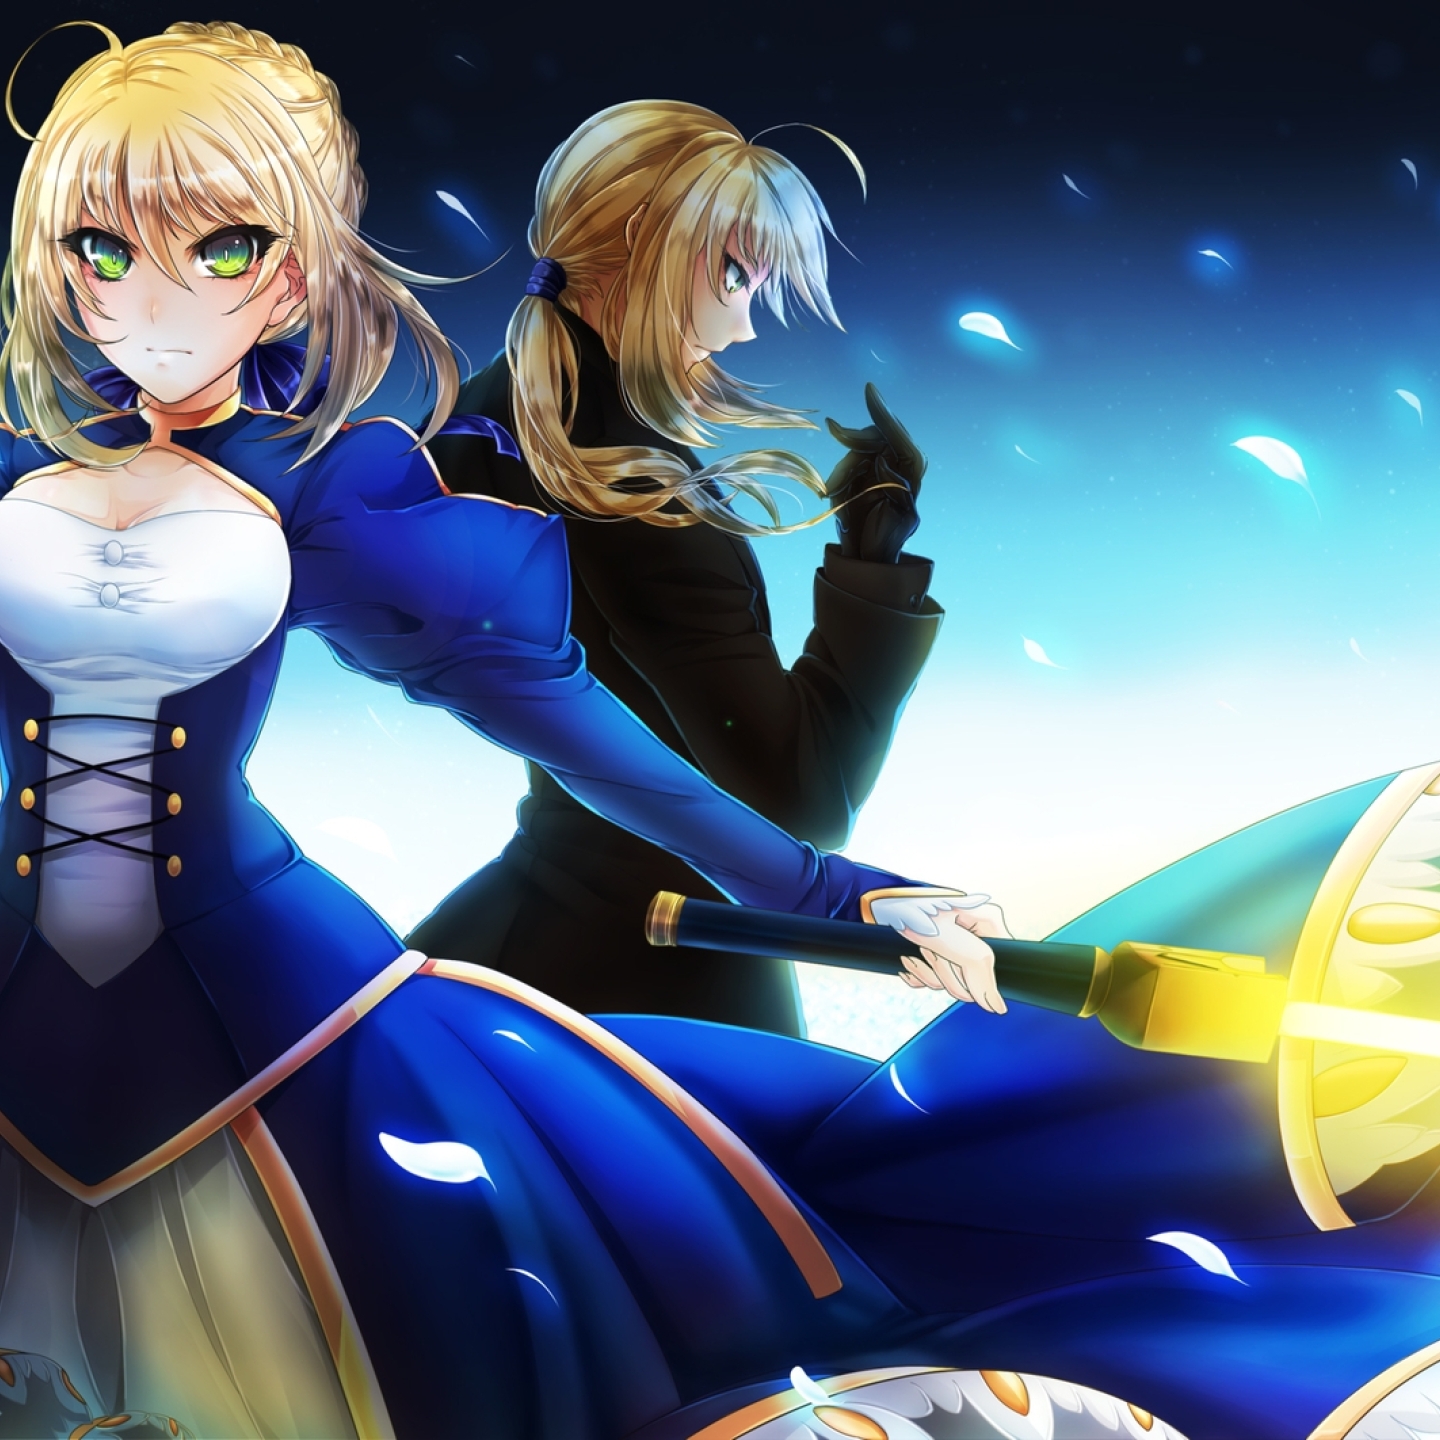 1440x1440 Fate Stay Night Fate Zero Saber Girl 1440x1440 Resolution Wallpaper Hd Anime 4k Wallpapers Images Photos And Background Wallpapers Den